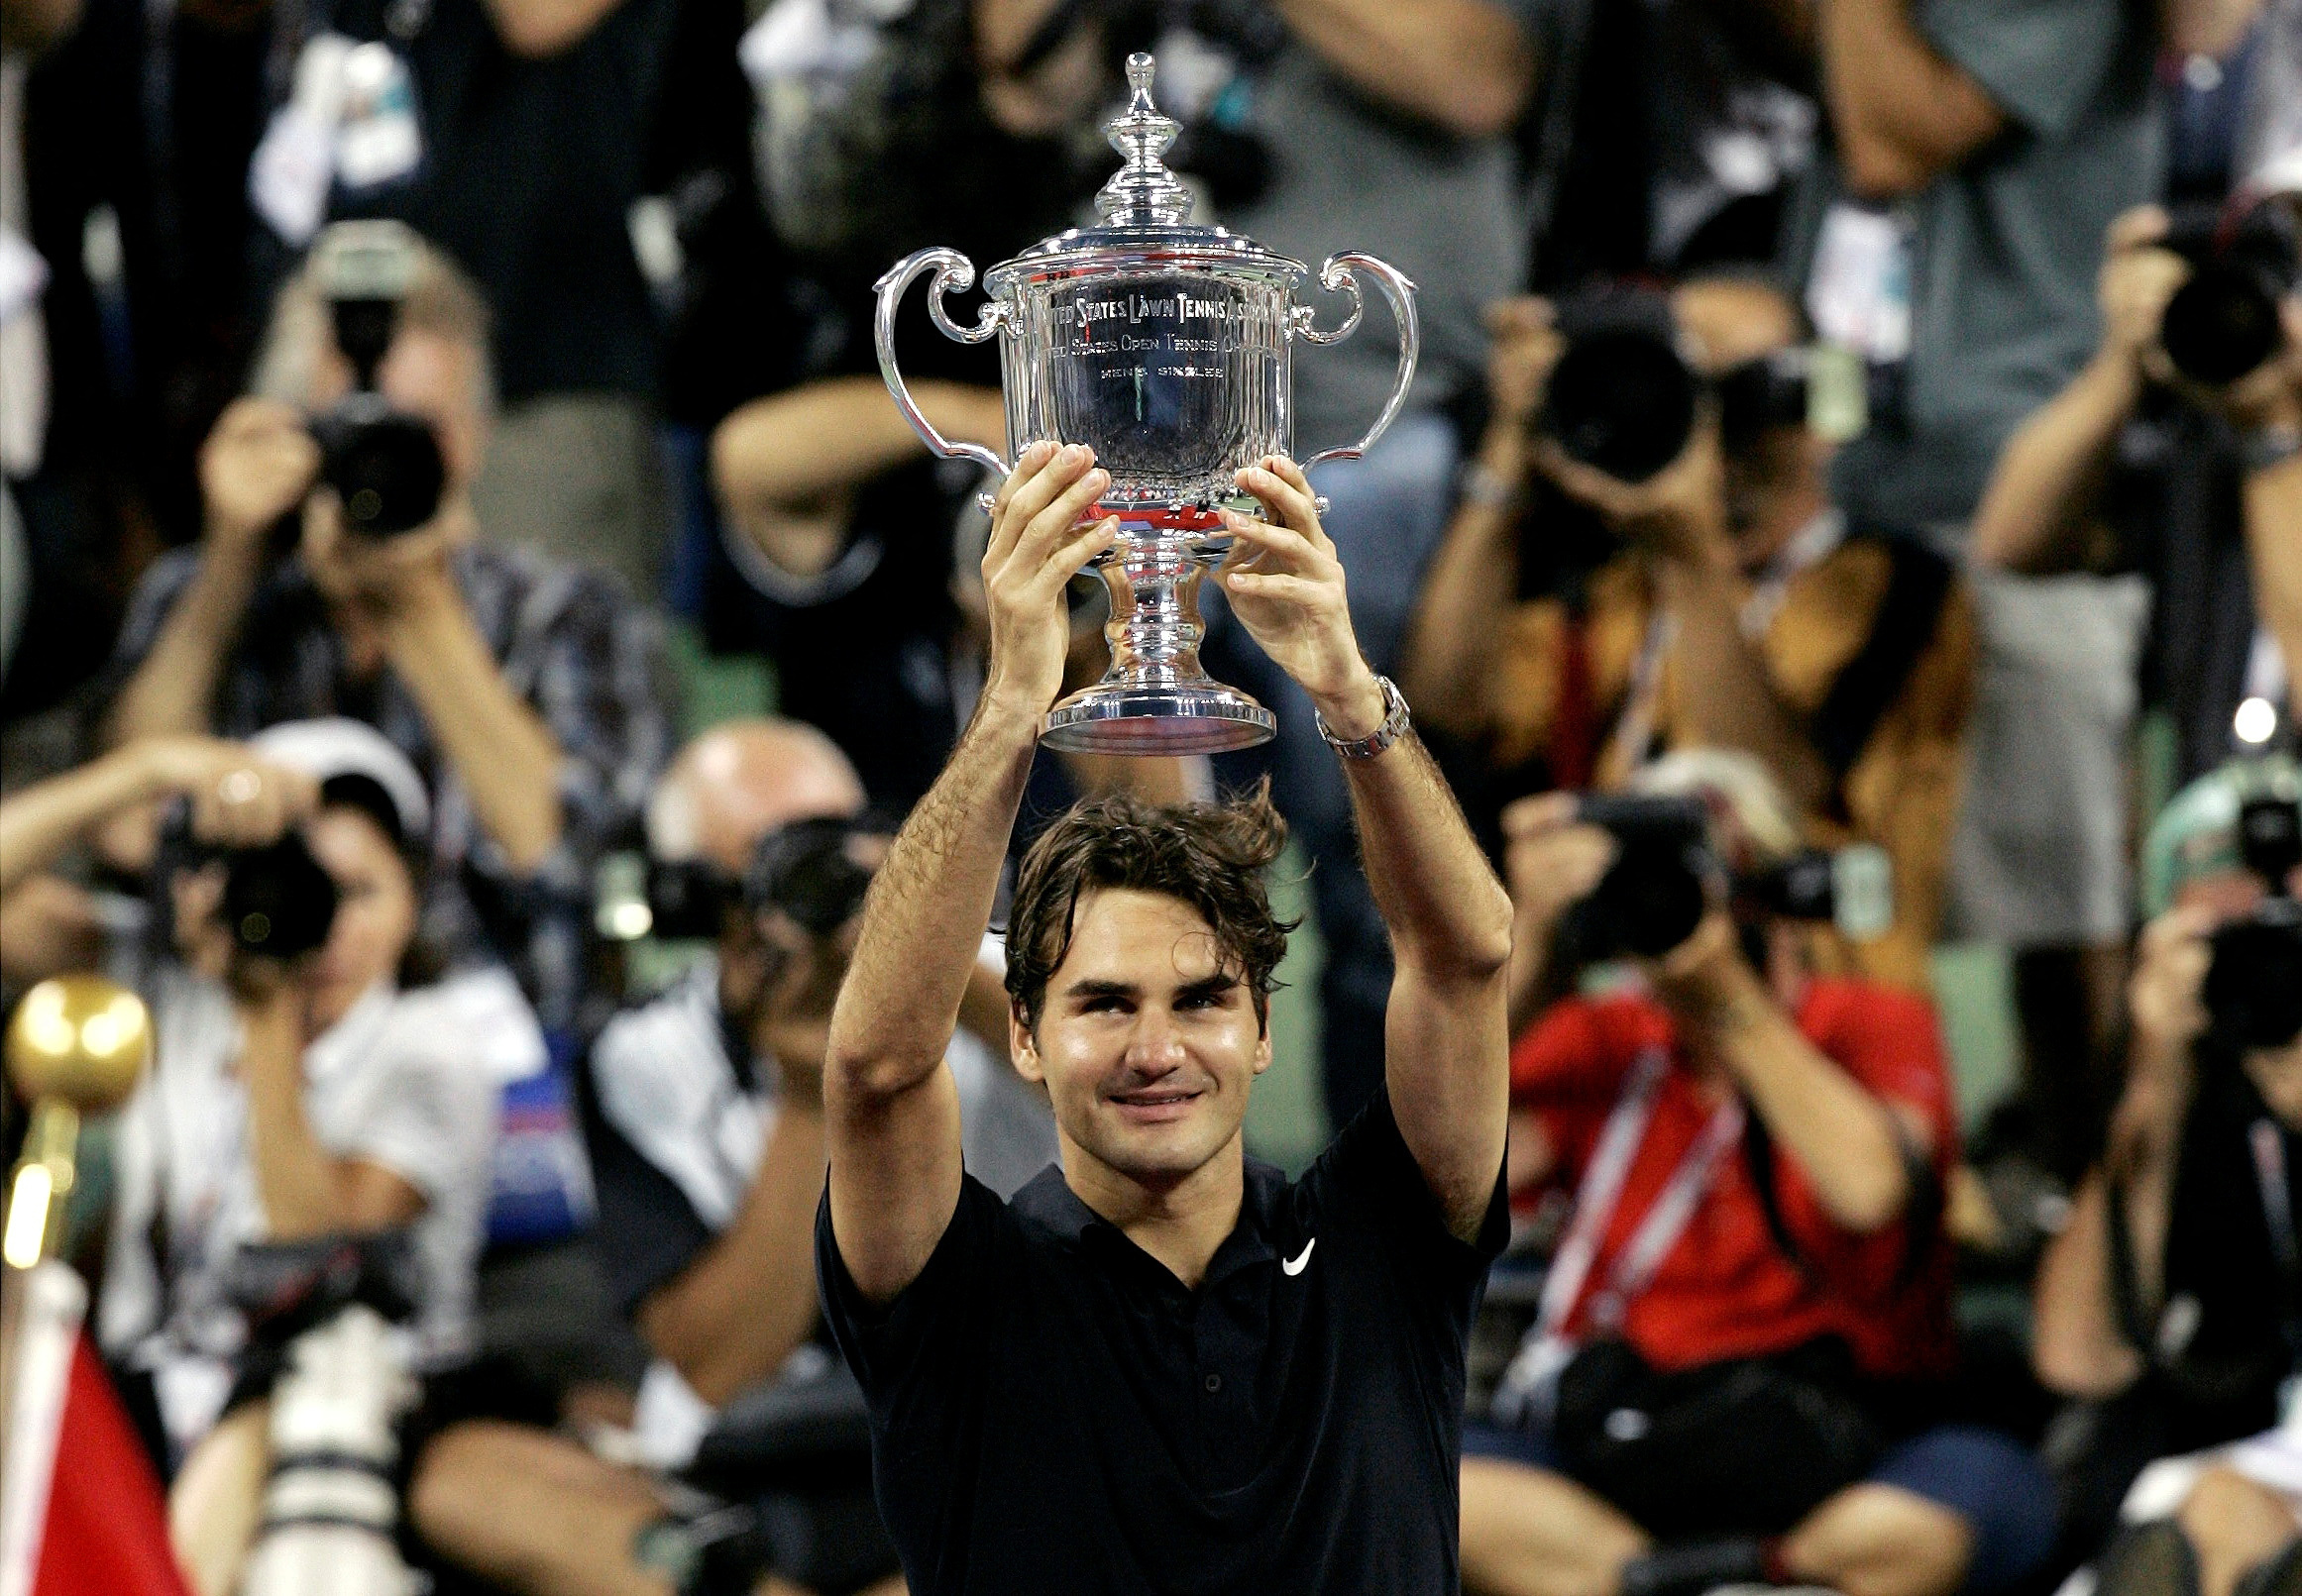 FILE PHOTO: Roger Federer of Switzerland holds up the trophy in front of photographers after winning his match against Novak Djokovic of Serbia in the men's final of the U.S. Open tennis tournament in Flushing Meadows, New York, September 9, 2007.